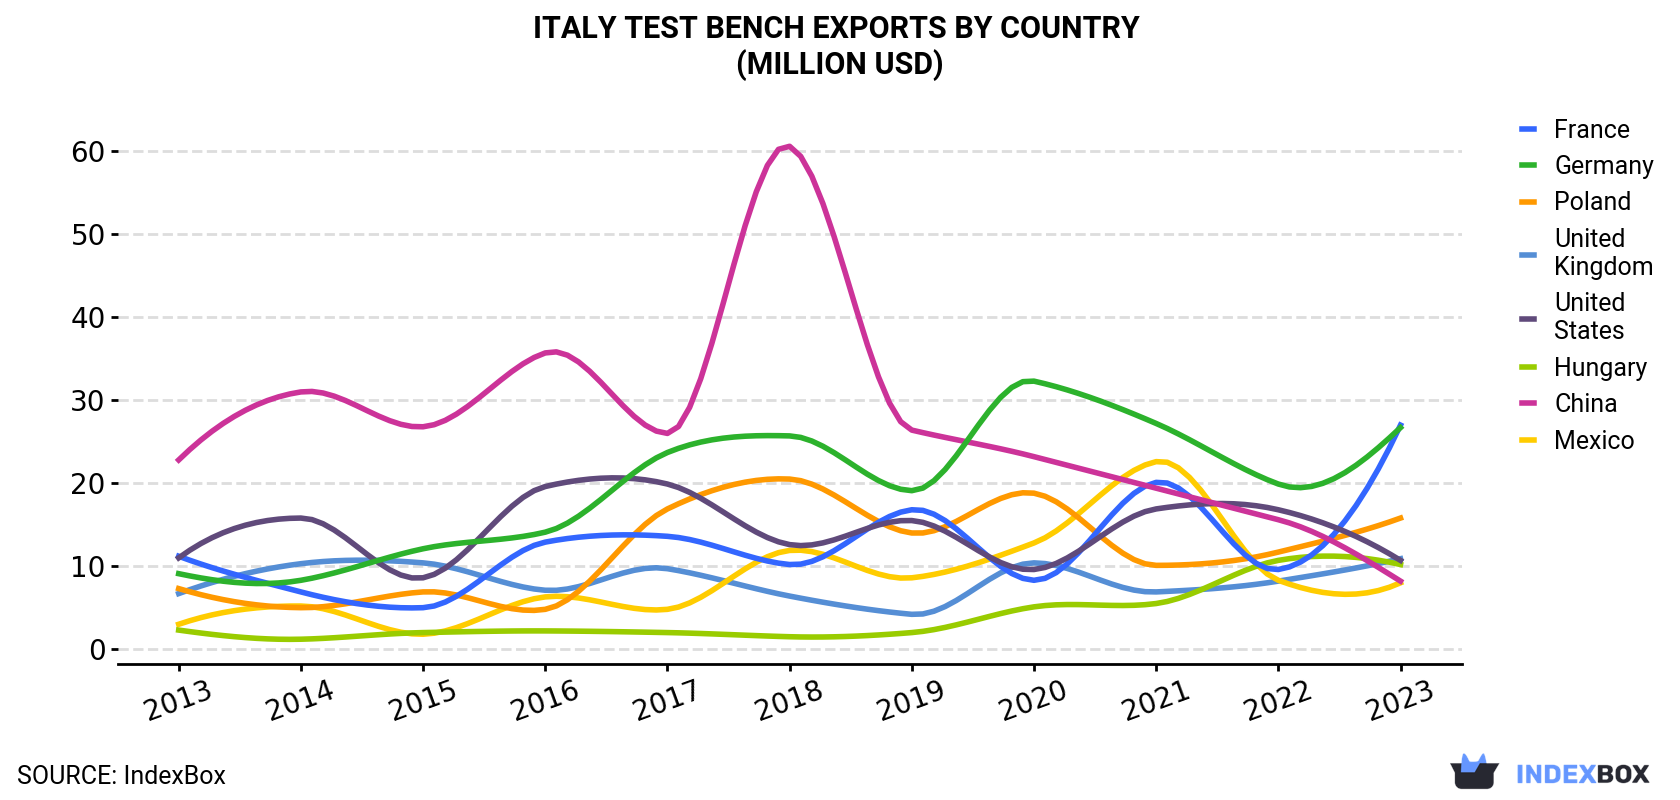 Italy Test Bench Exports By Country (Million USD)